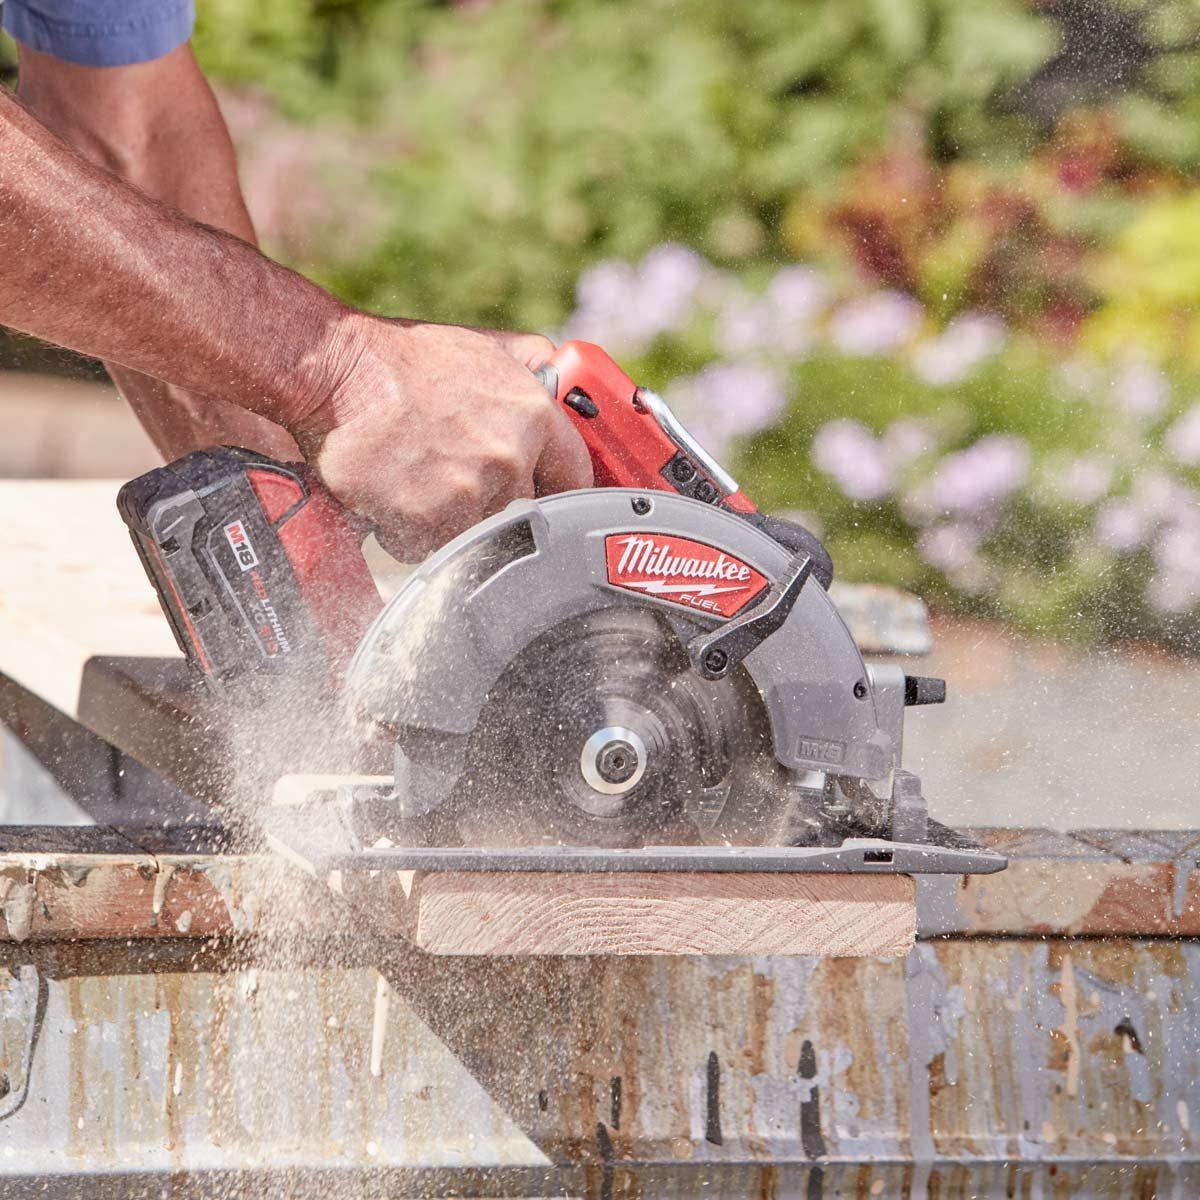 2018 Best in DIY - What to Look for in a Cordless Circular Saw